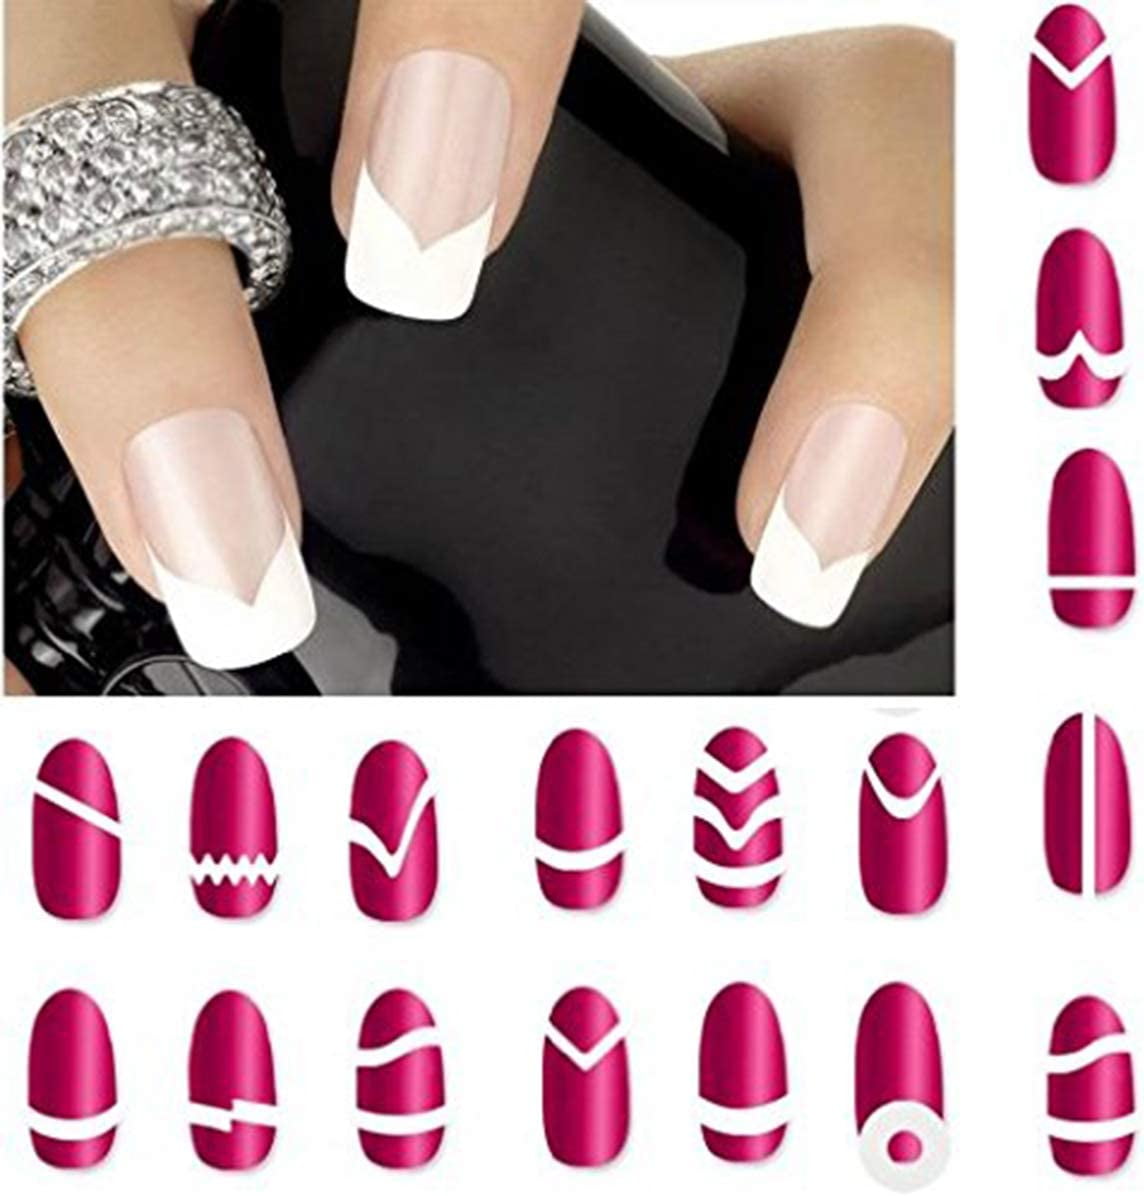 Besufy 48Pcs French Stencil Nail Art Form Fringe Guides Manicure DIY  Stickers Tips Decor